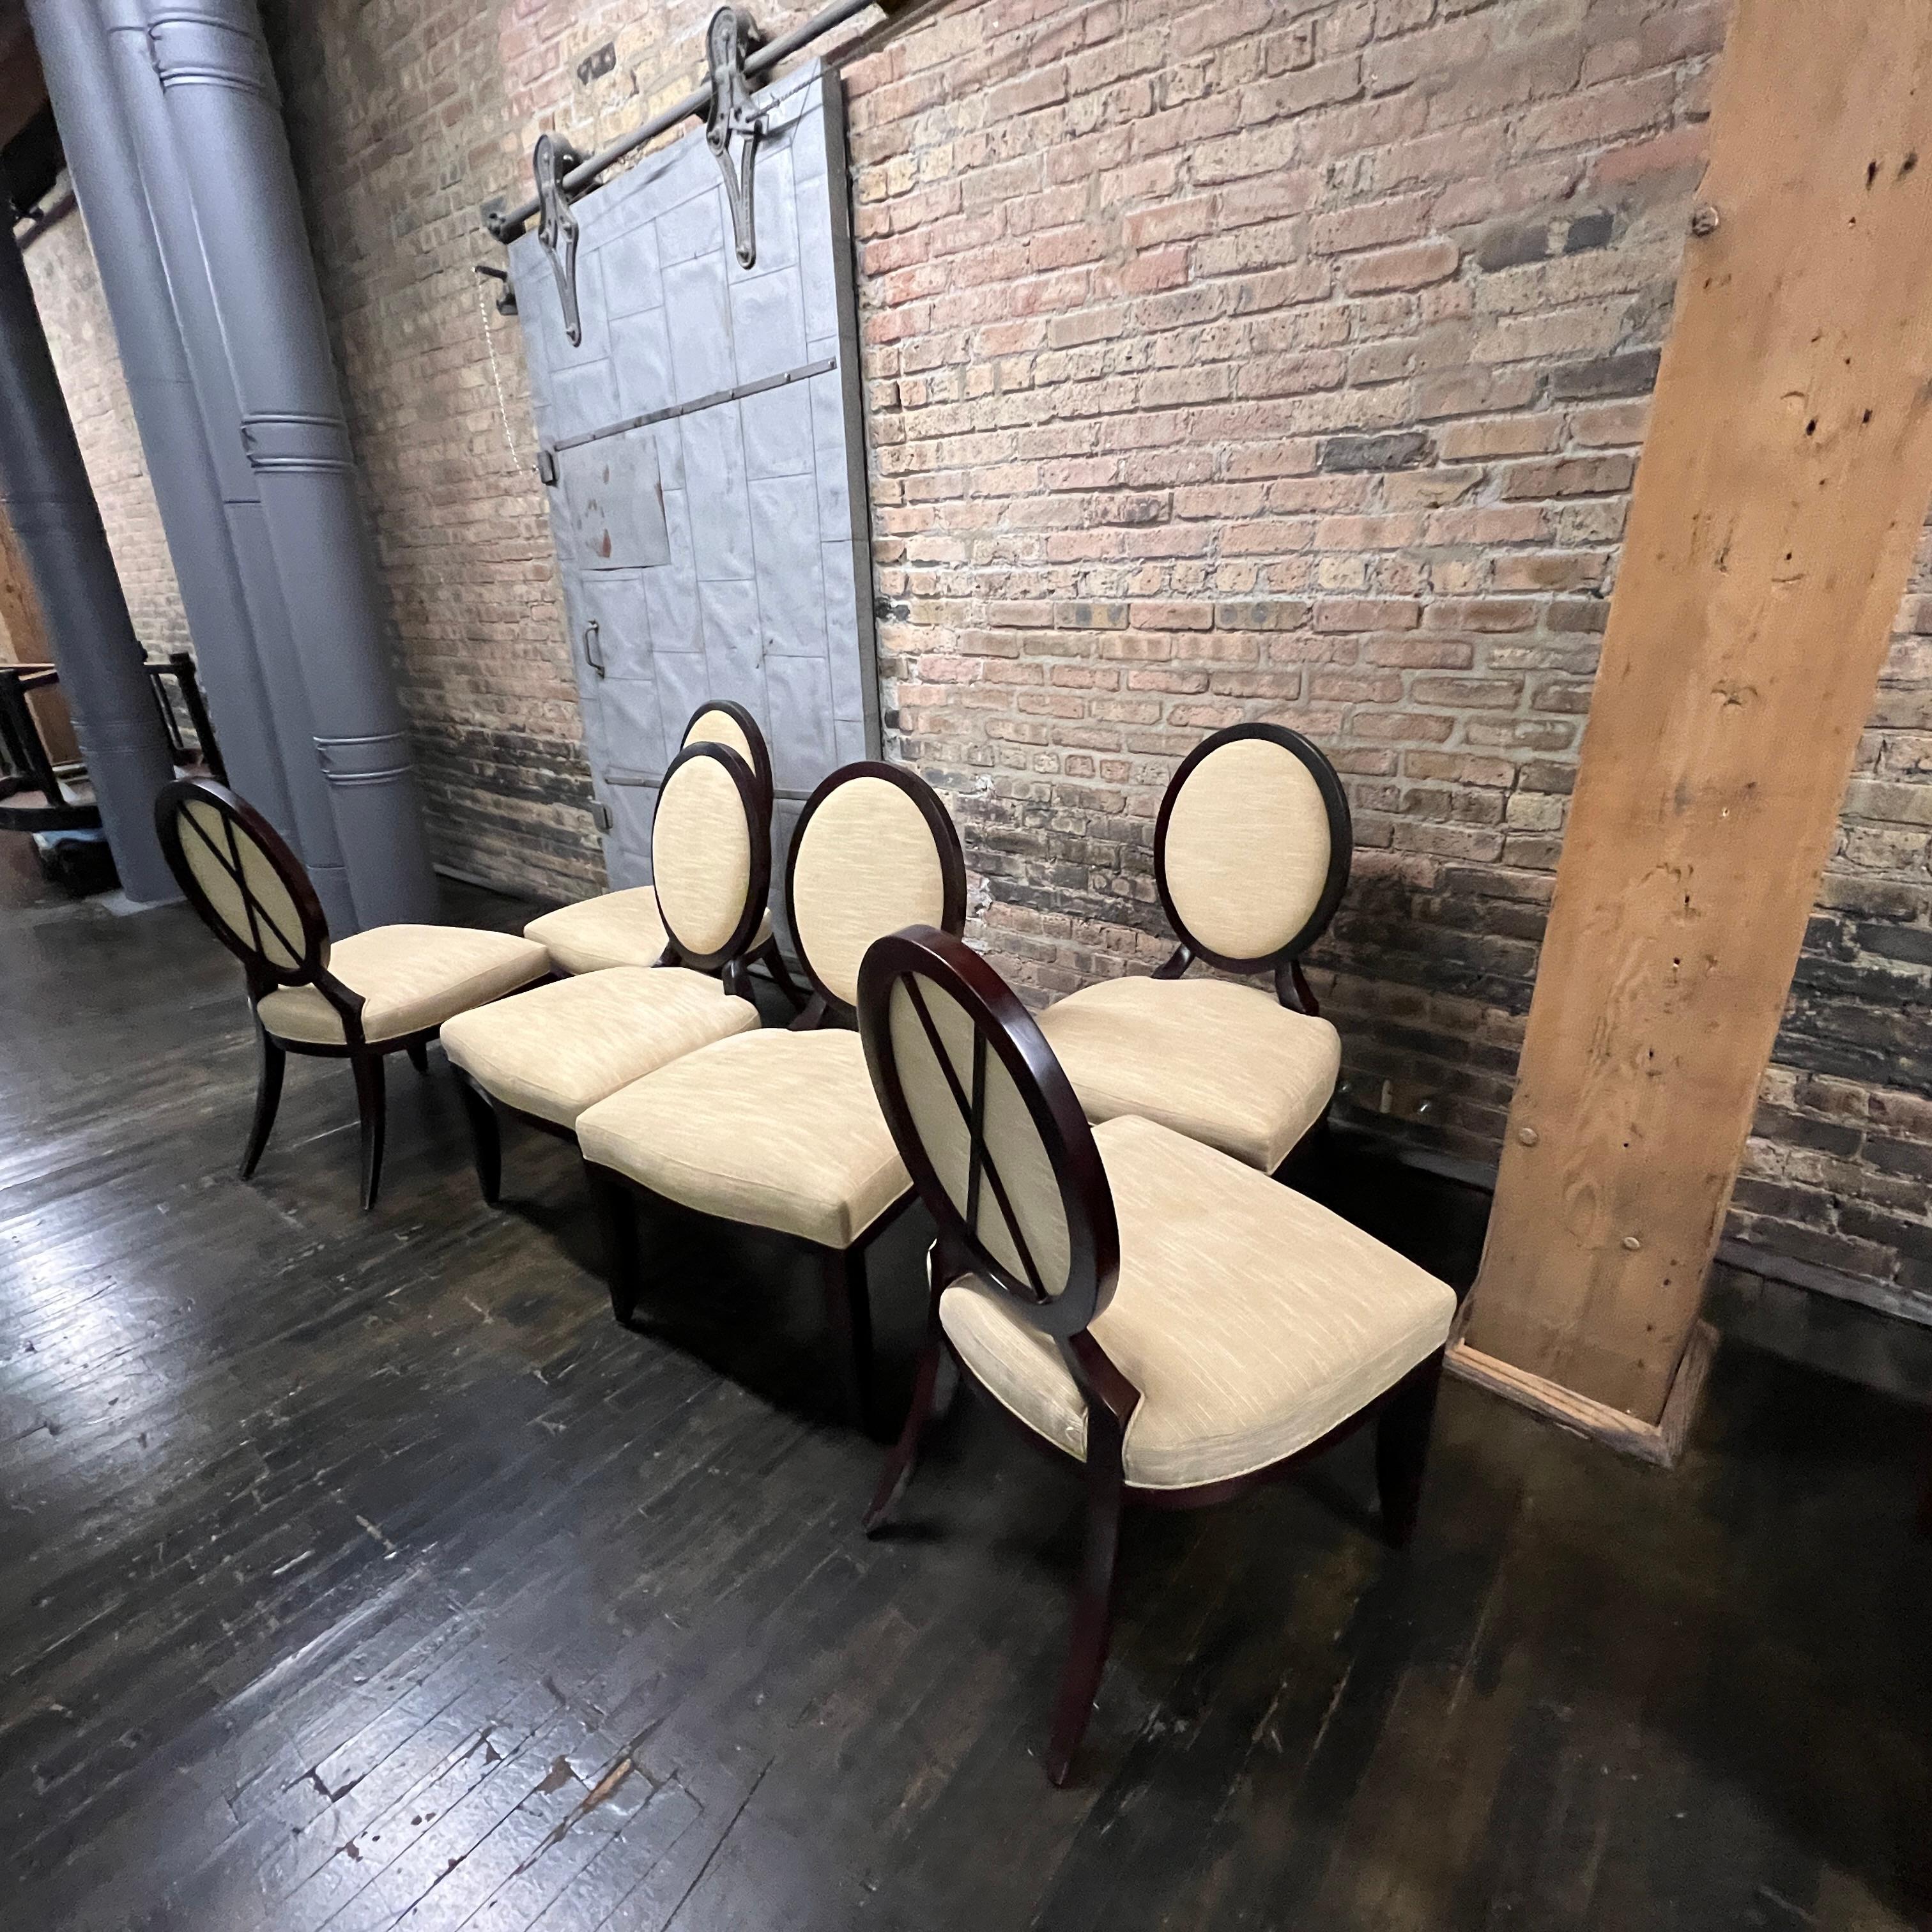 An impressive set of 6 dining chairs designed by Barbara Barry for Baker. This set is without arms (although we do have 2 arm chairs available in a separate listing). These chairs are still in production today (and sell for between $3K - $4K per